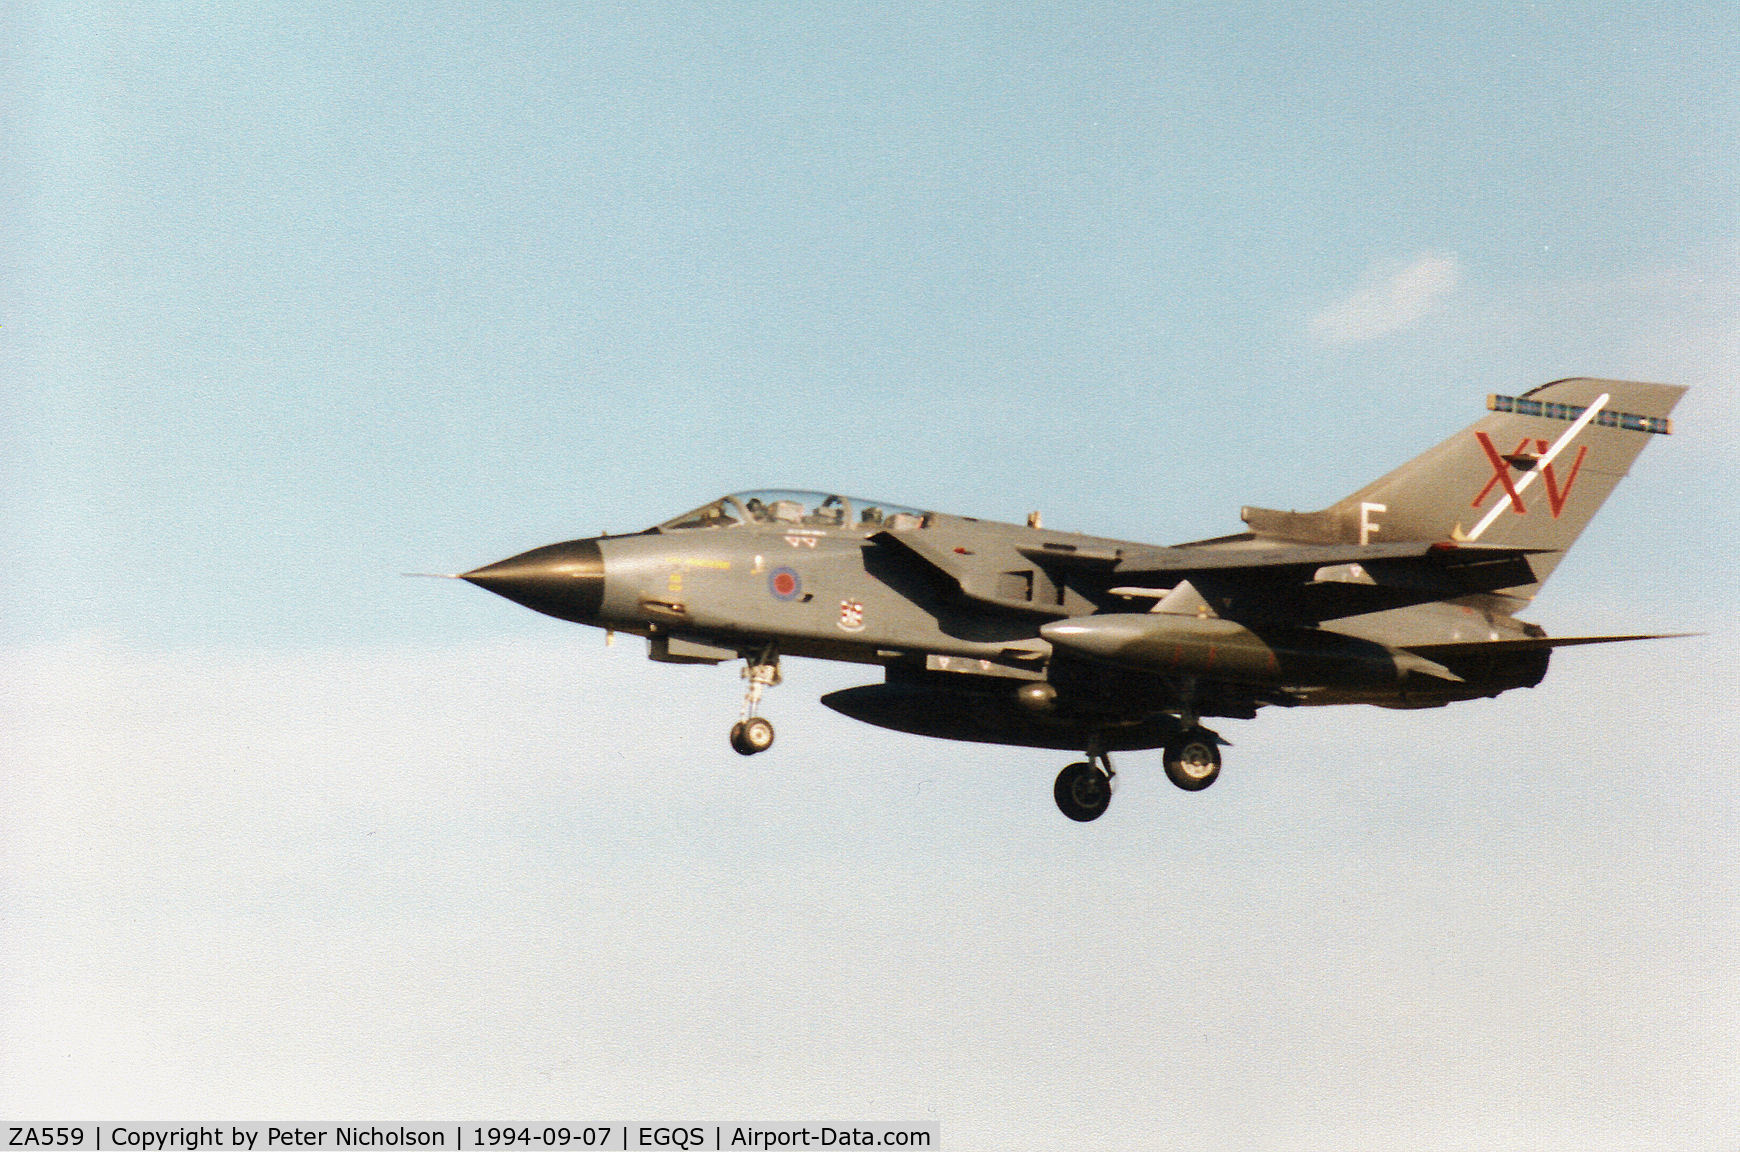 ZA559, 1981 Panavia 081/BS023/3043 C/N 081/BS023/3043, Tornado GR.1 of 15(Reserve) Squadron on finals for Runway 23 at RAF Lossiemouth in September 1994.